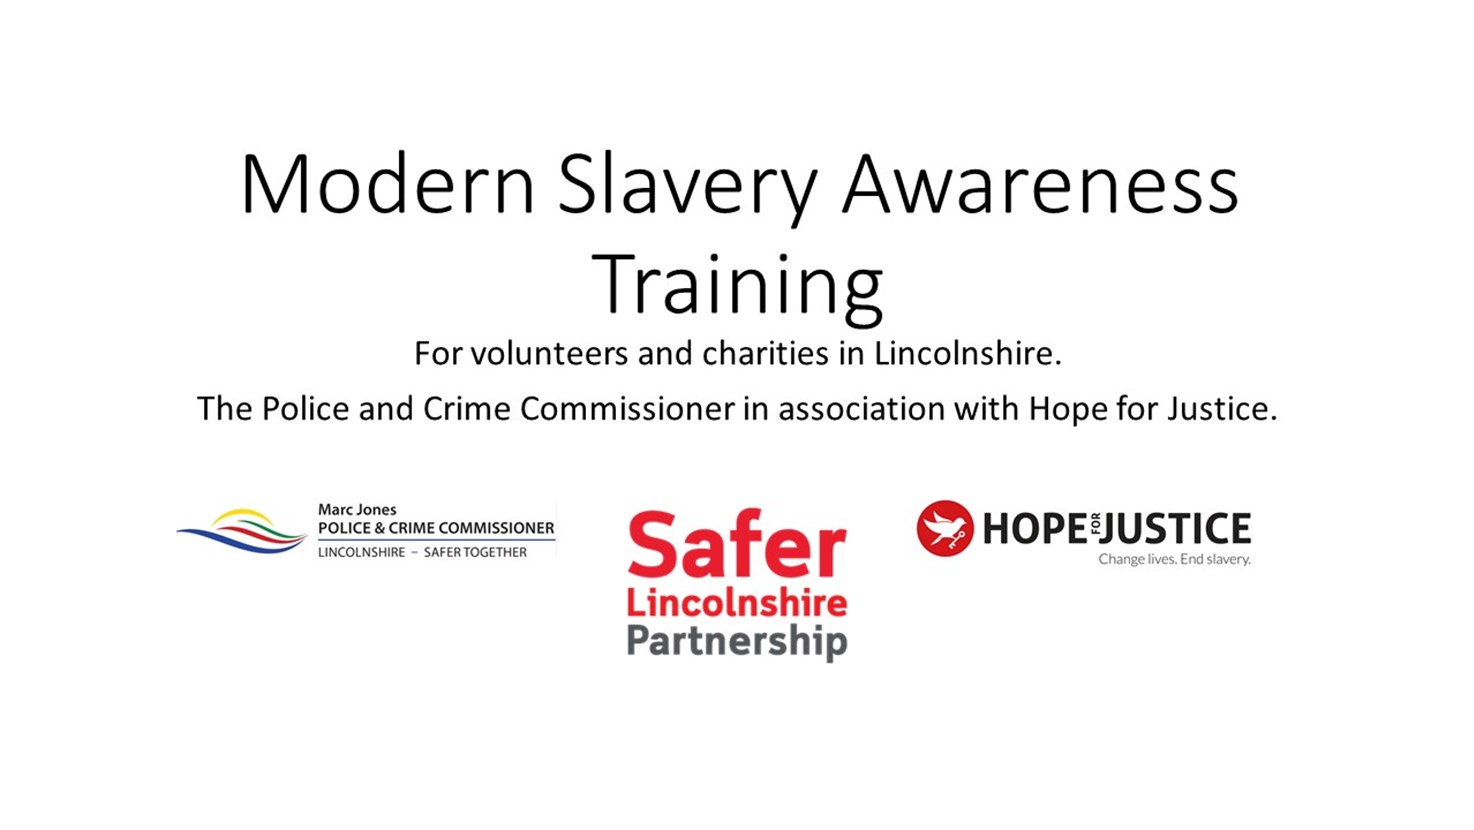 Free Modern Slavery Awareness Training for Lincolnshire Voluntary Organisations and Charities 